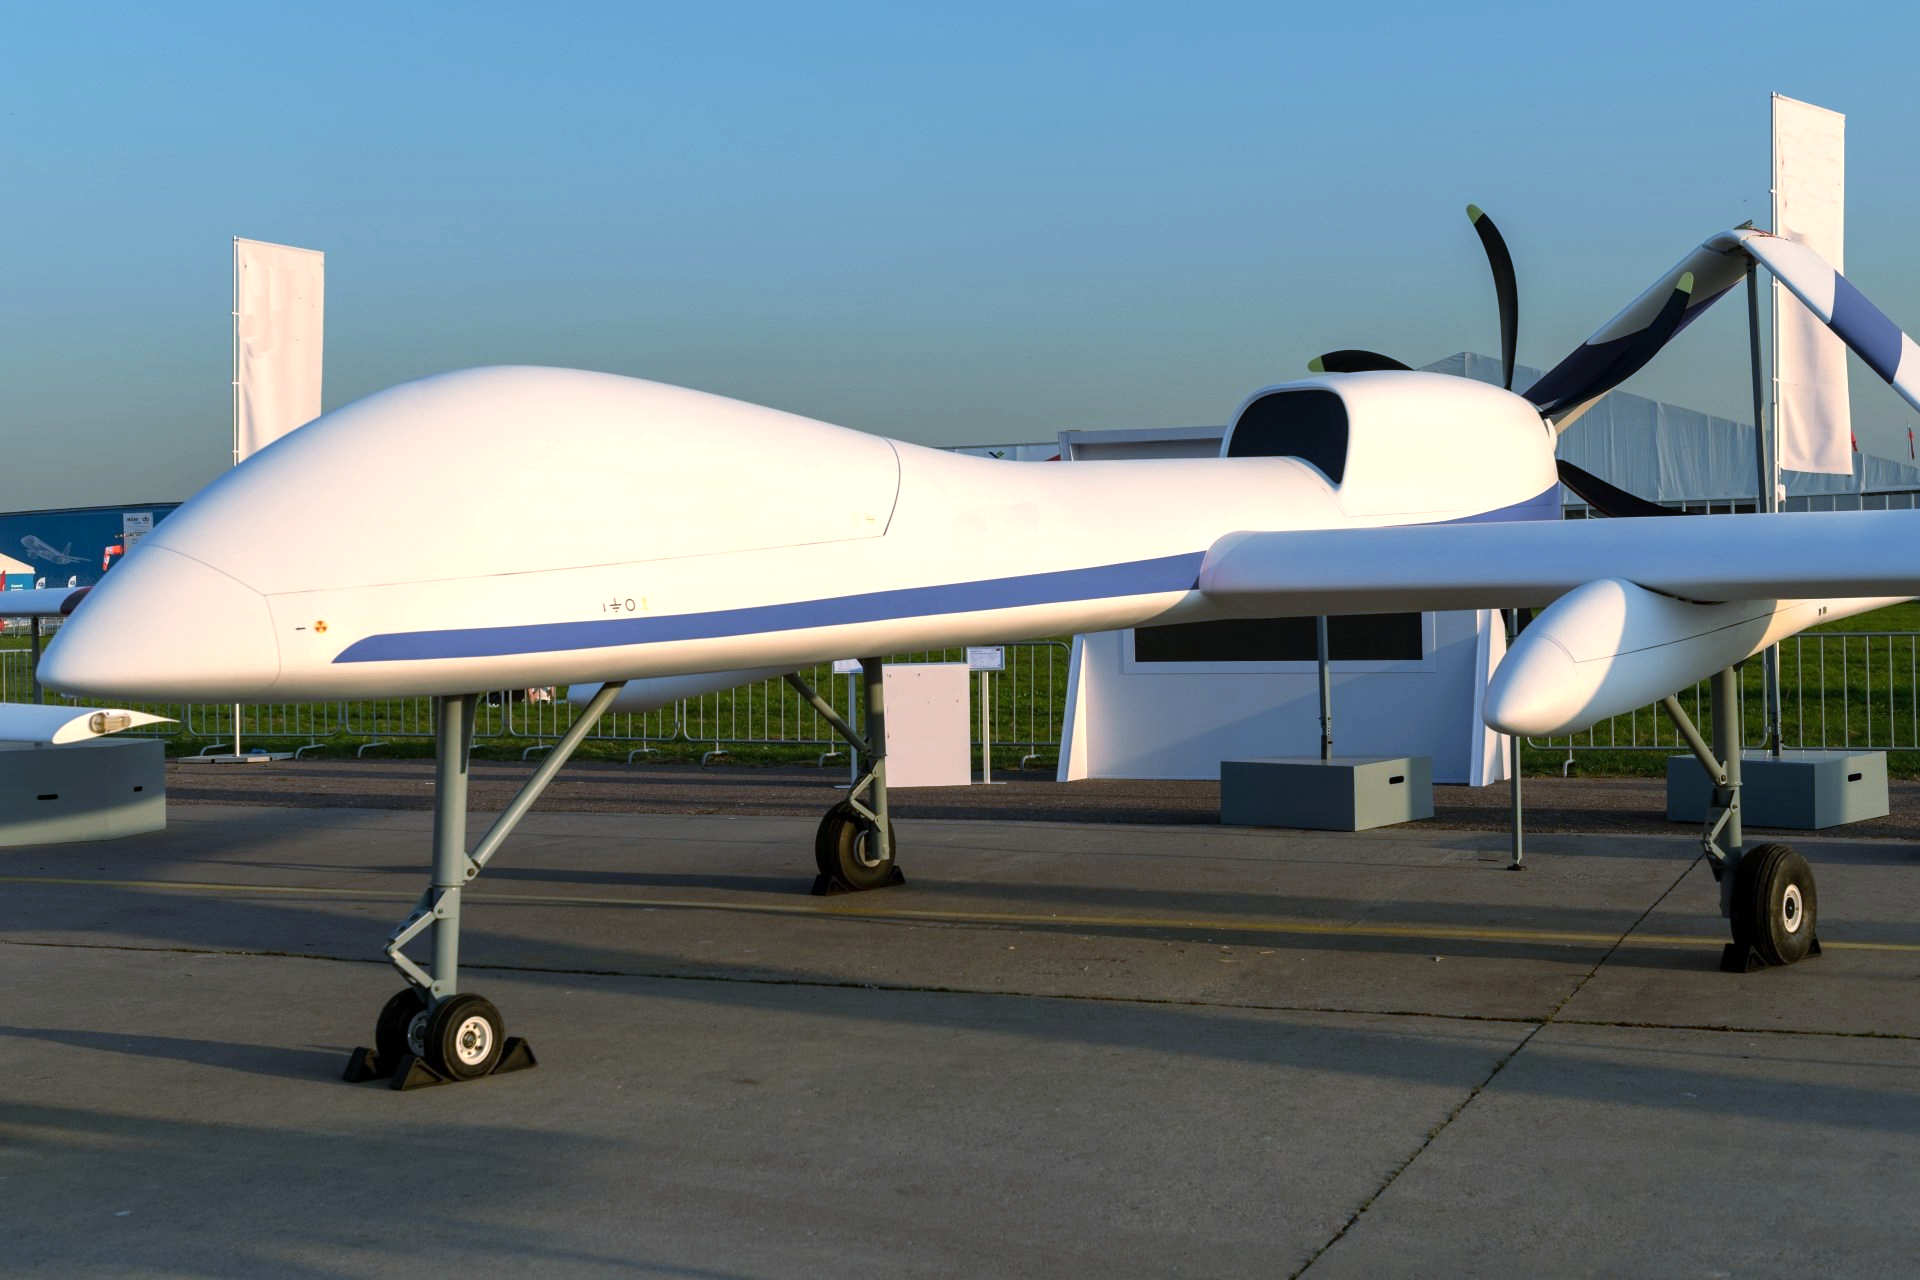 Military drone aircraft